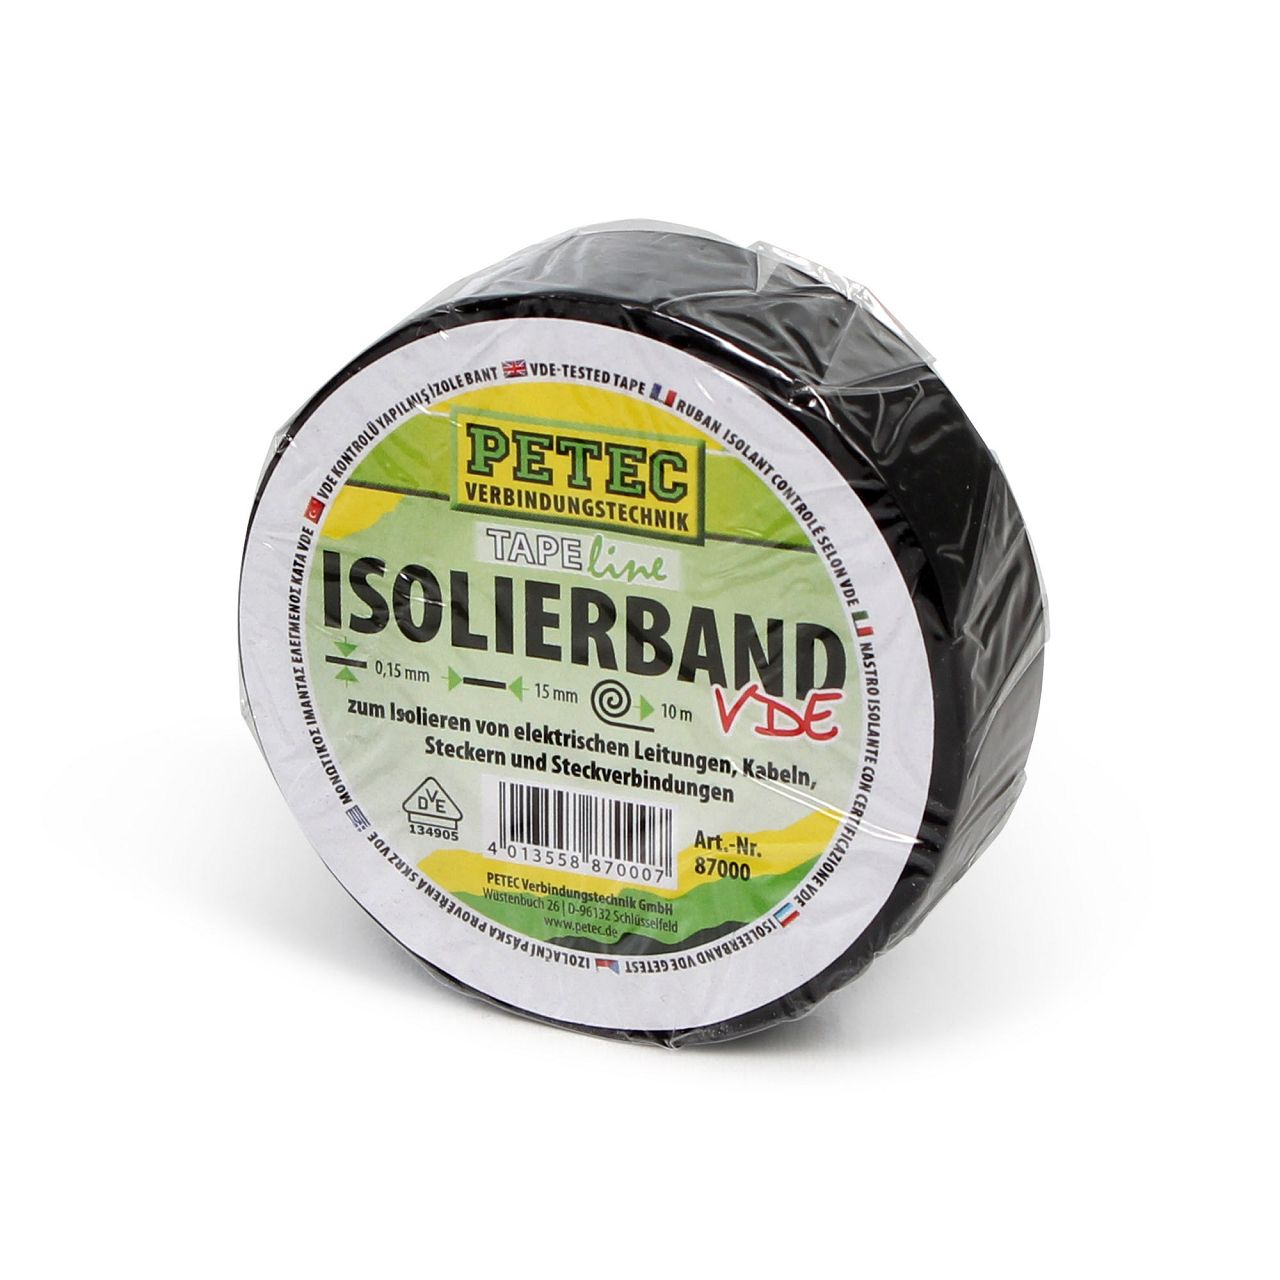 PETEC 87000 Isolierband VDE Klebeband Isolier-Tape ISO-Band